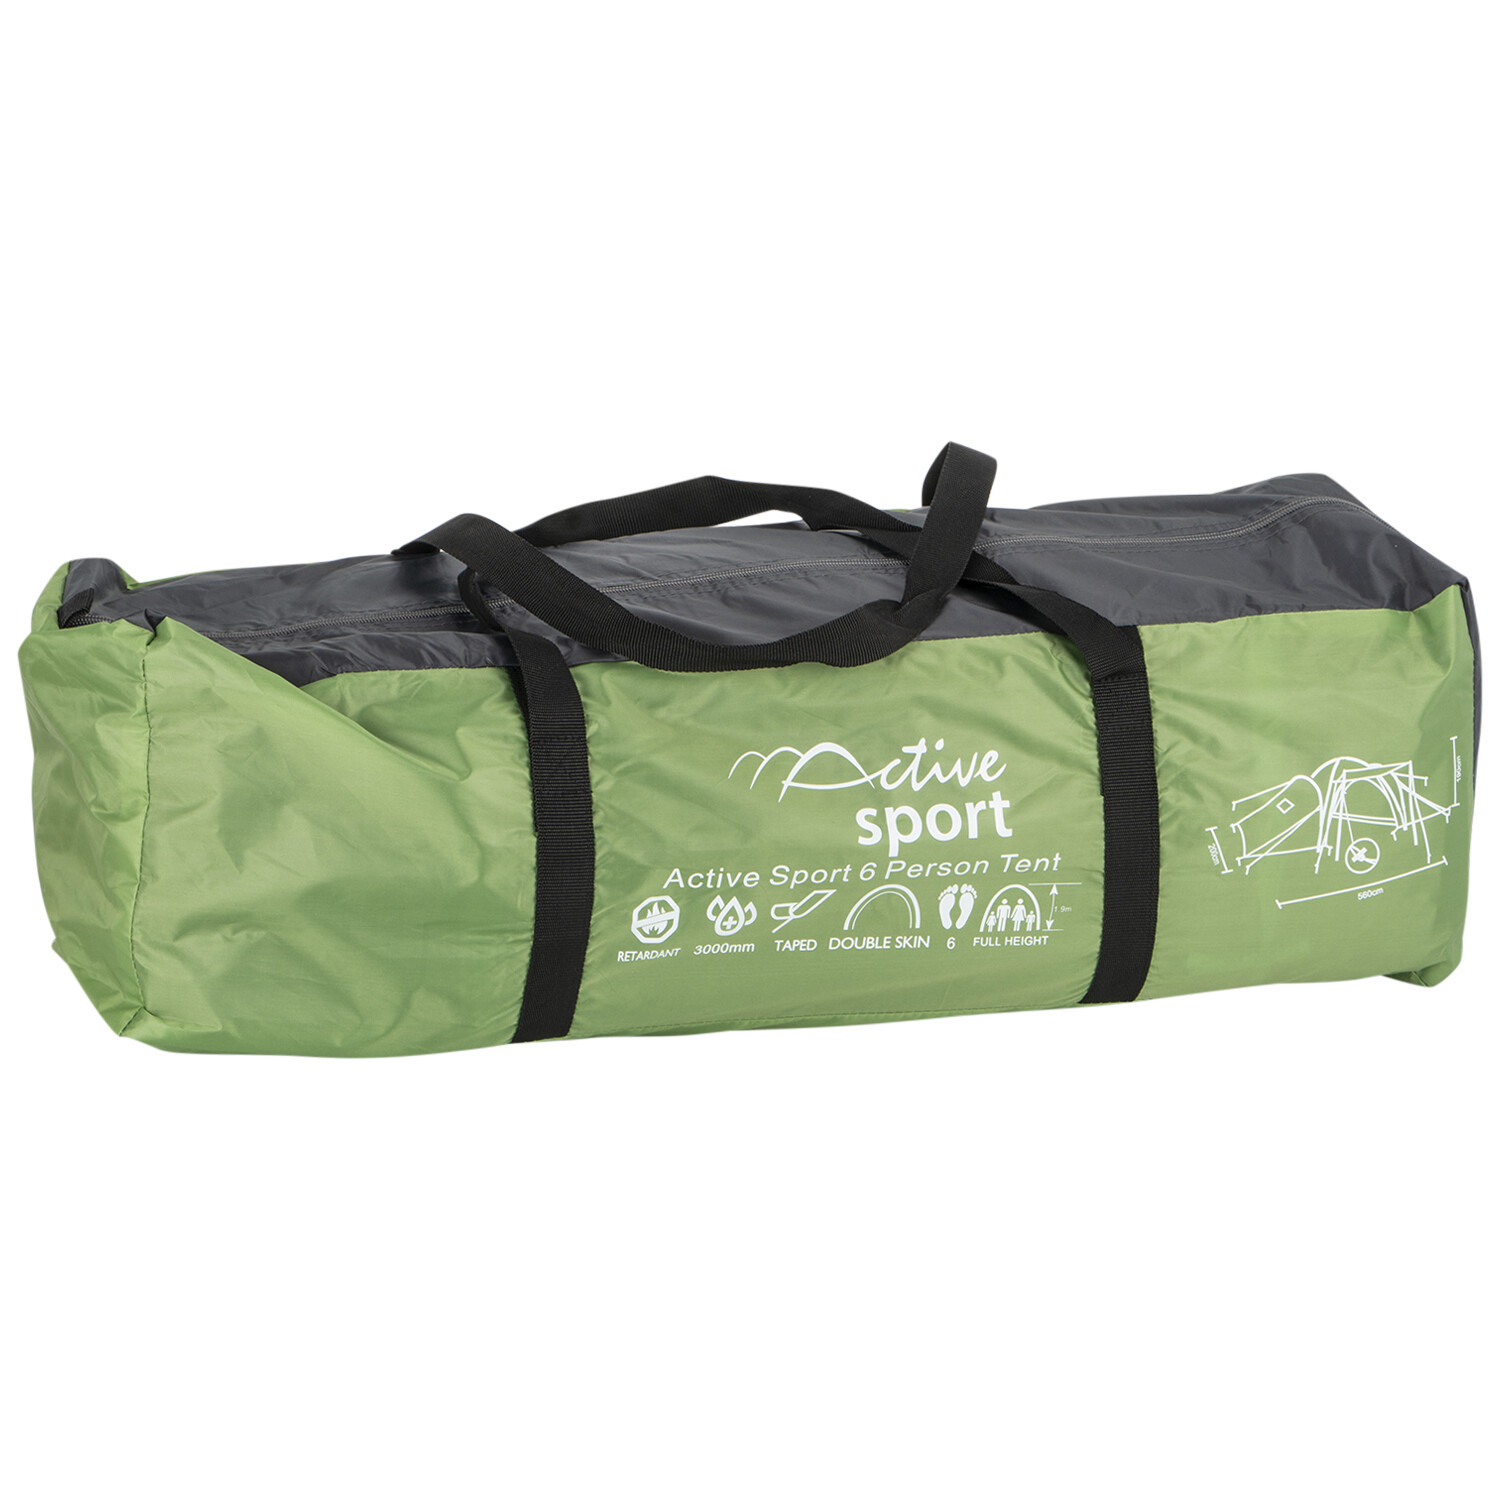 Active Sport 6 Person Tent Image 3